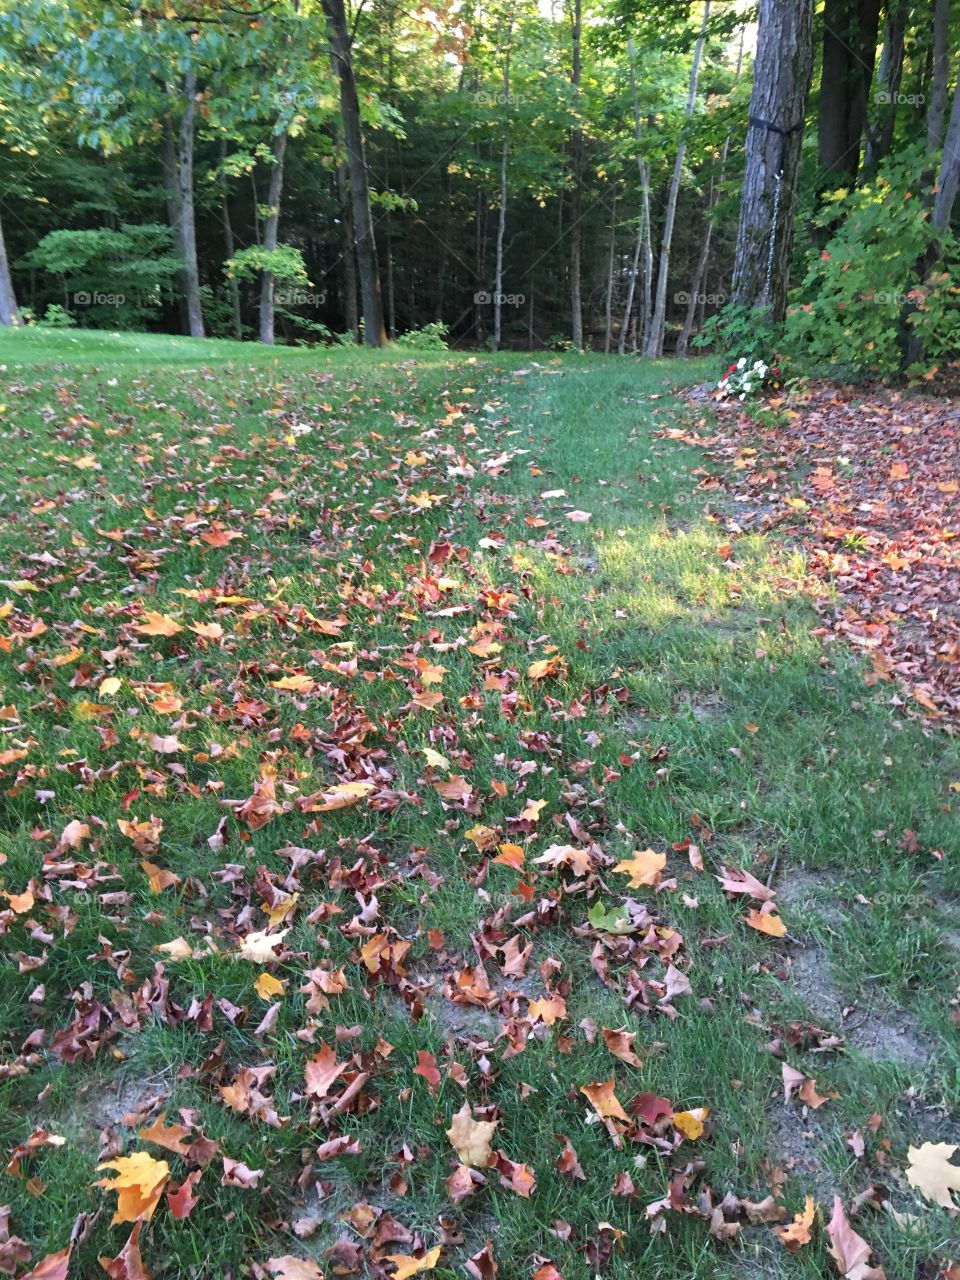 first pass with lawn sweeper - fall time now!